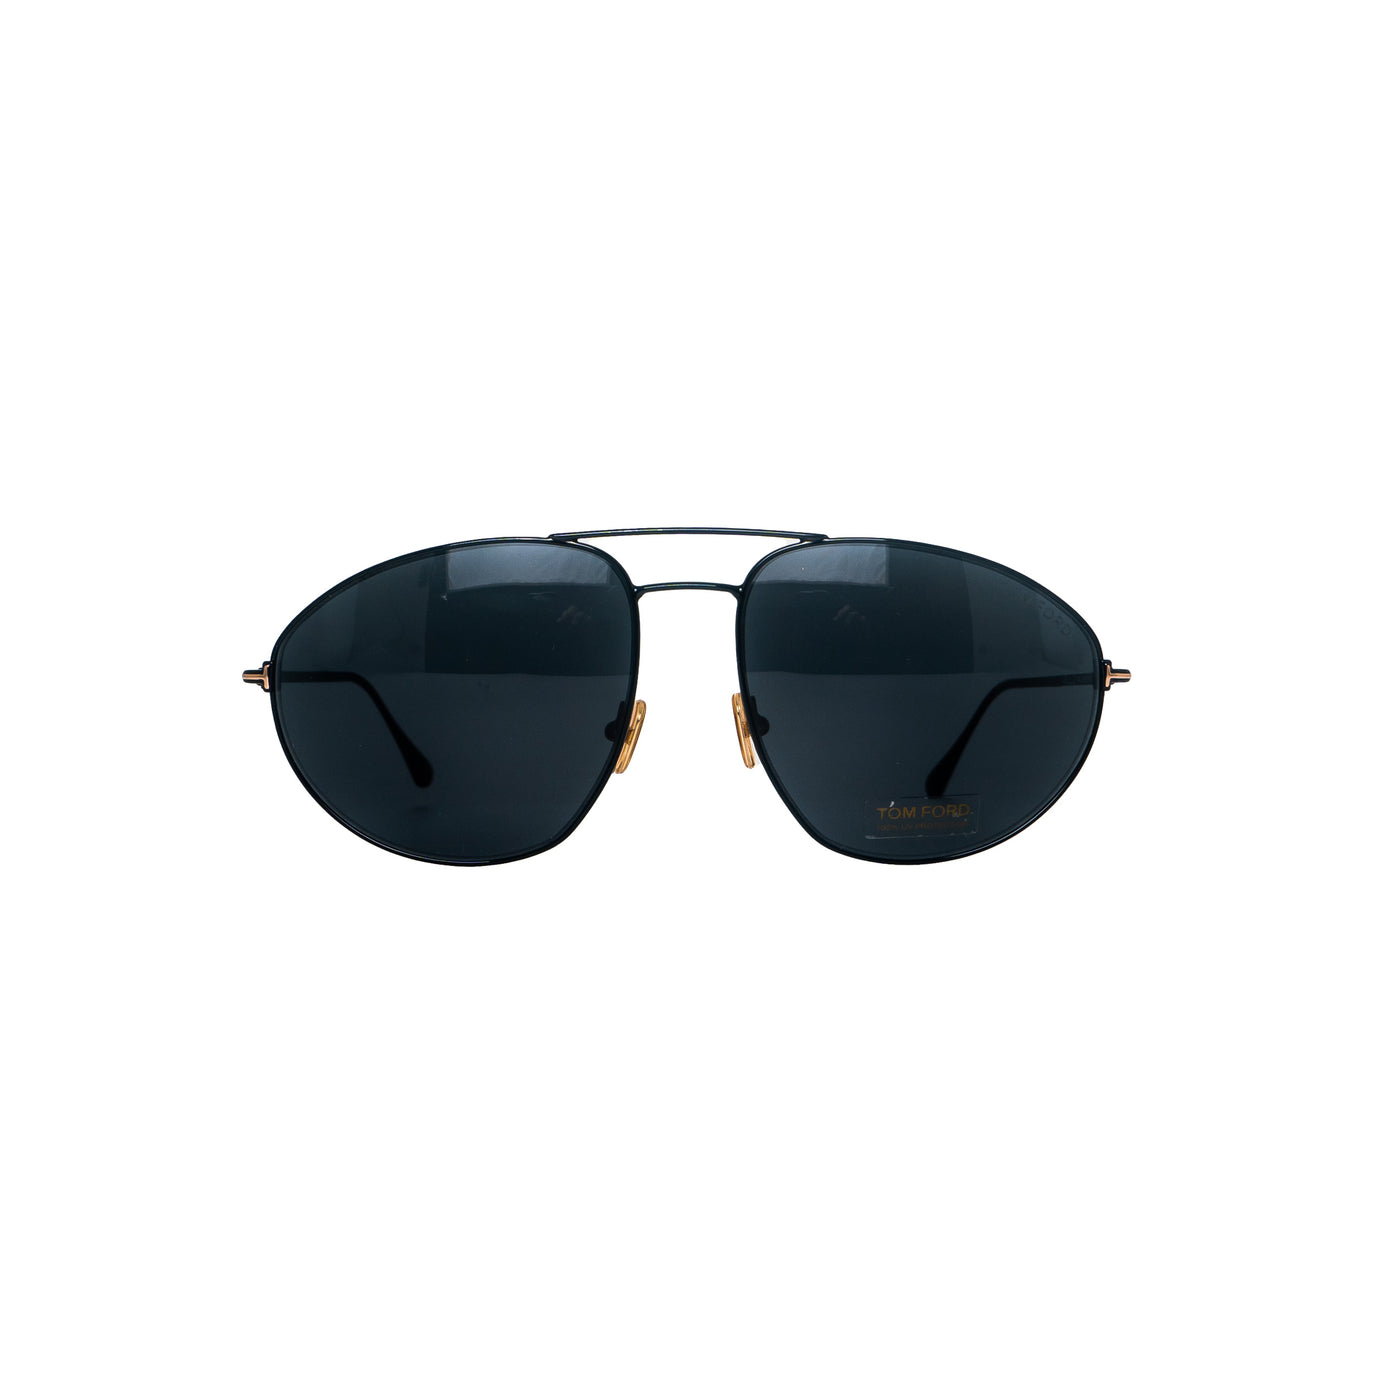 Tom Ford Sunglasses | FT079601A59 - Vision Express Optical Philippines